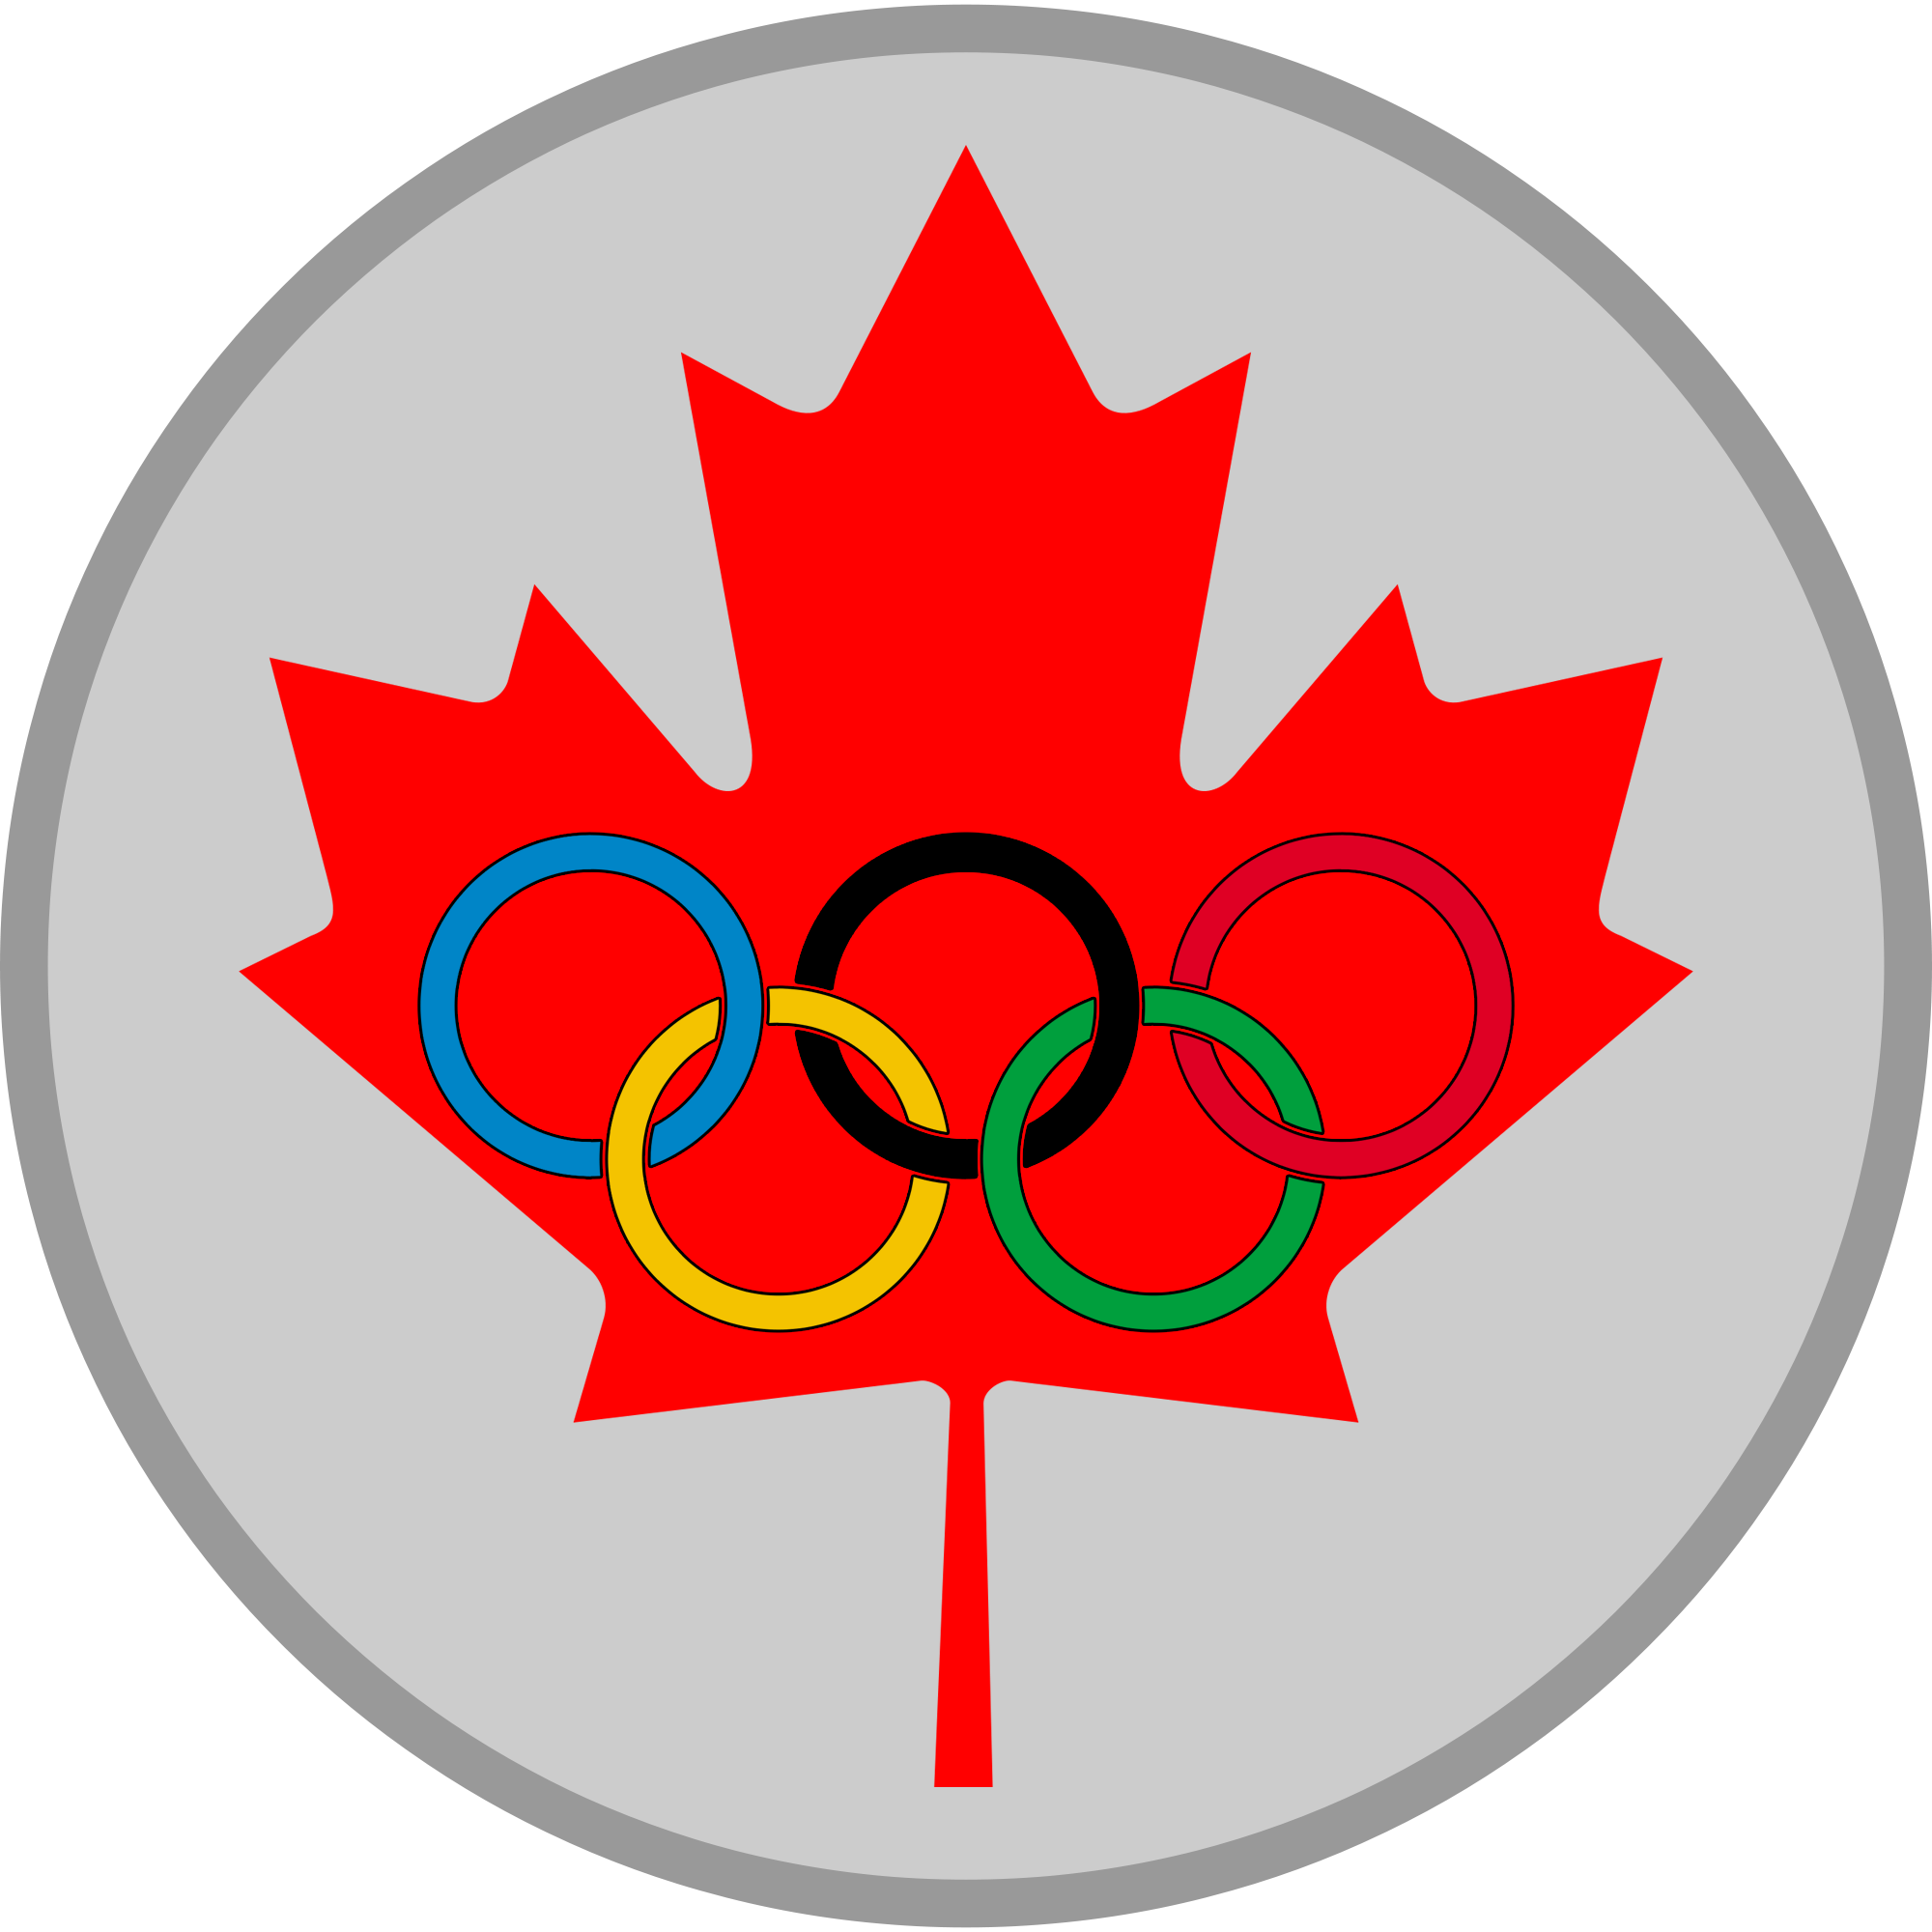 Maple leaf olympic silver medal.png